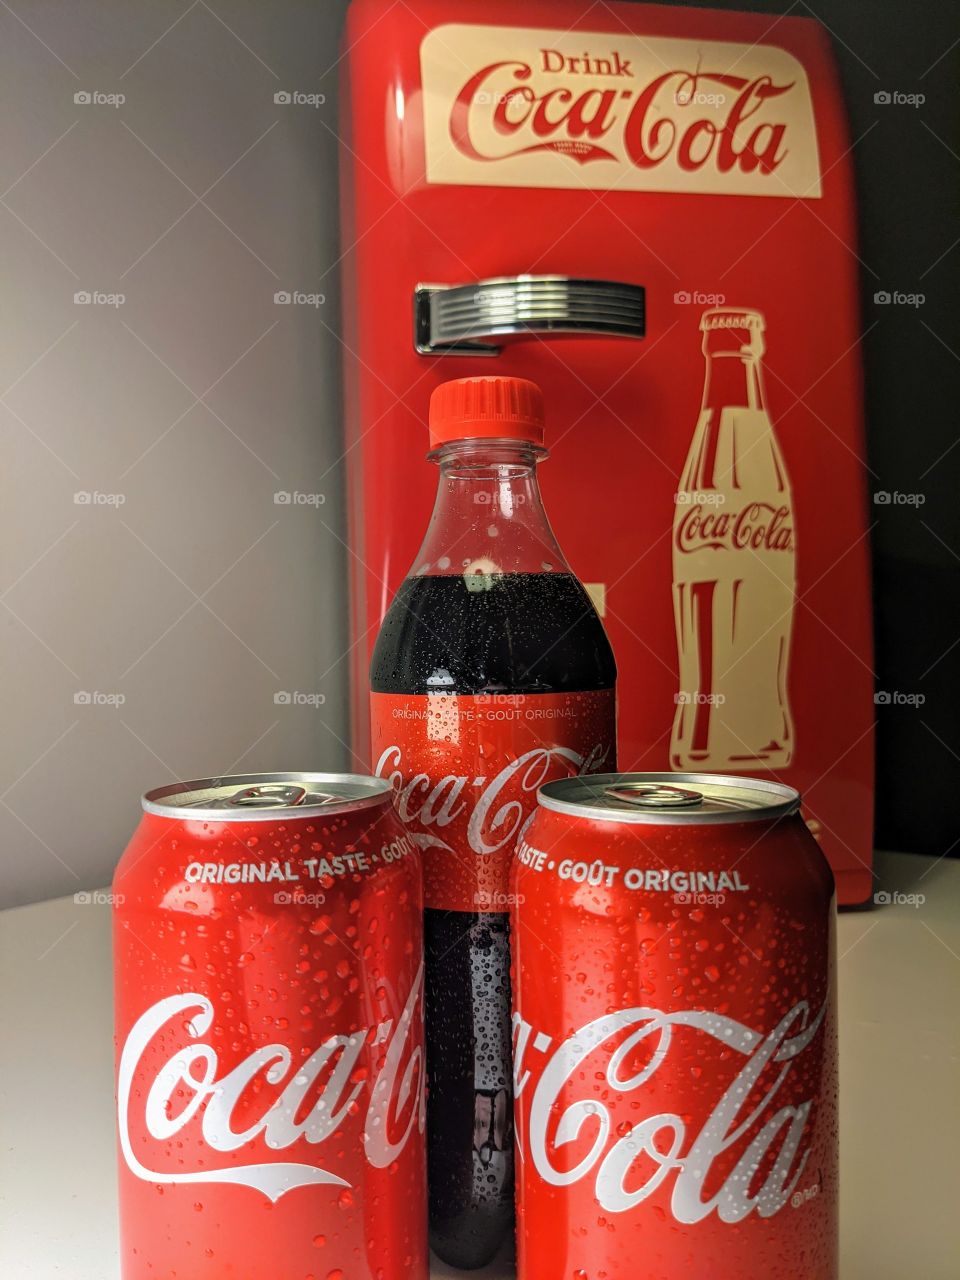 Coke cans and bottles with vintage mini fridge